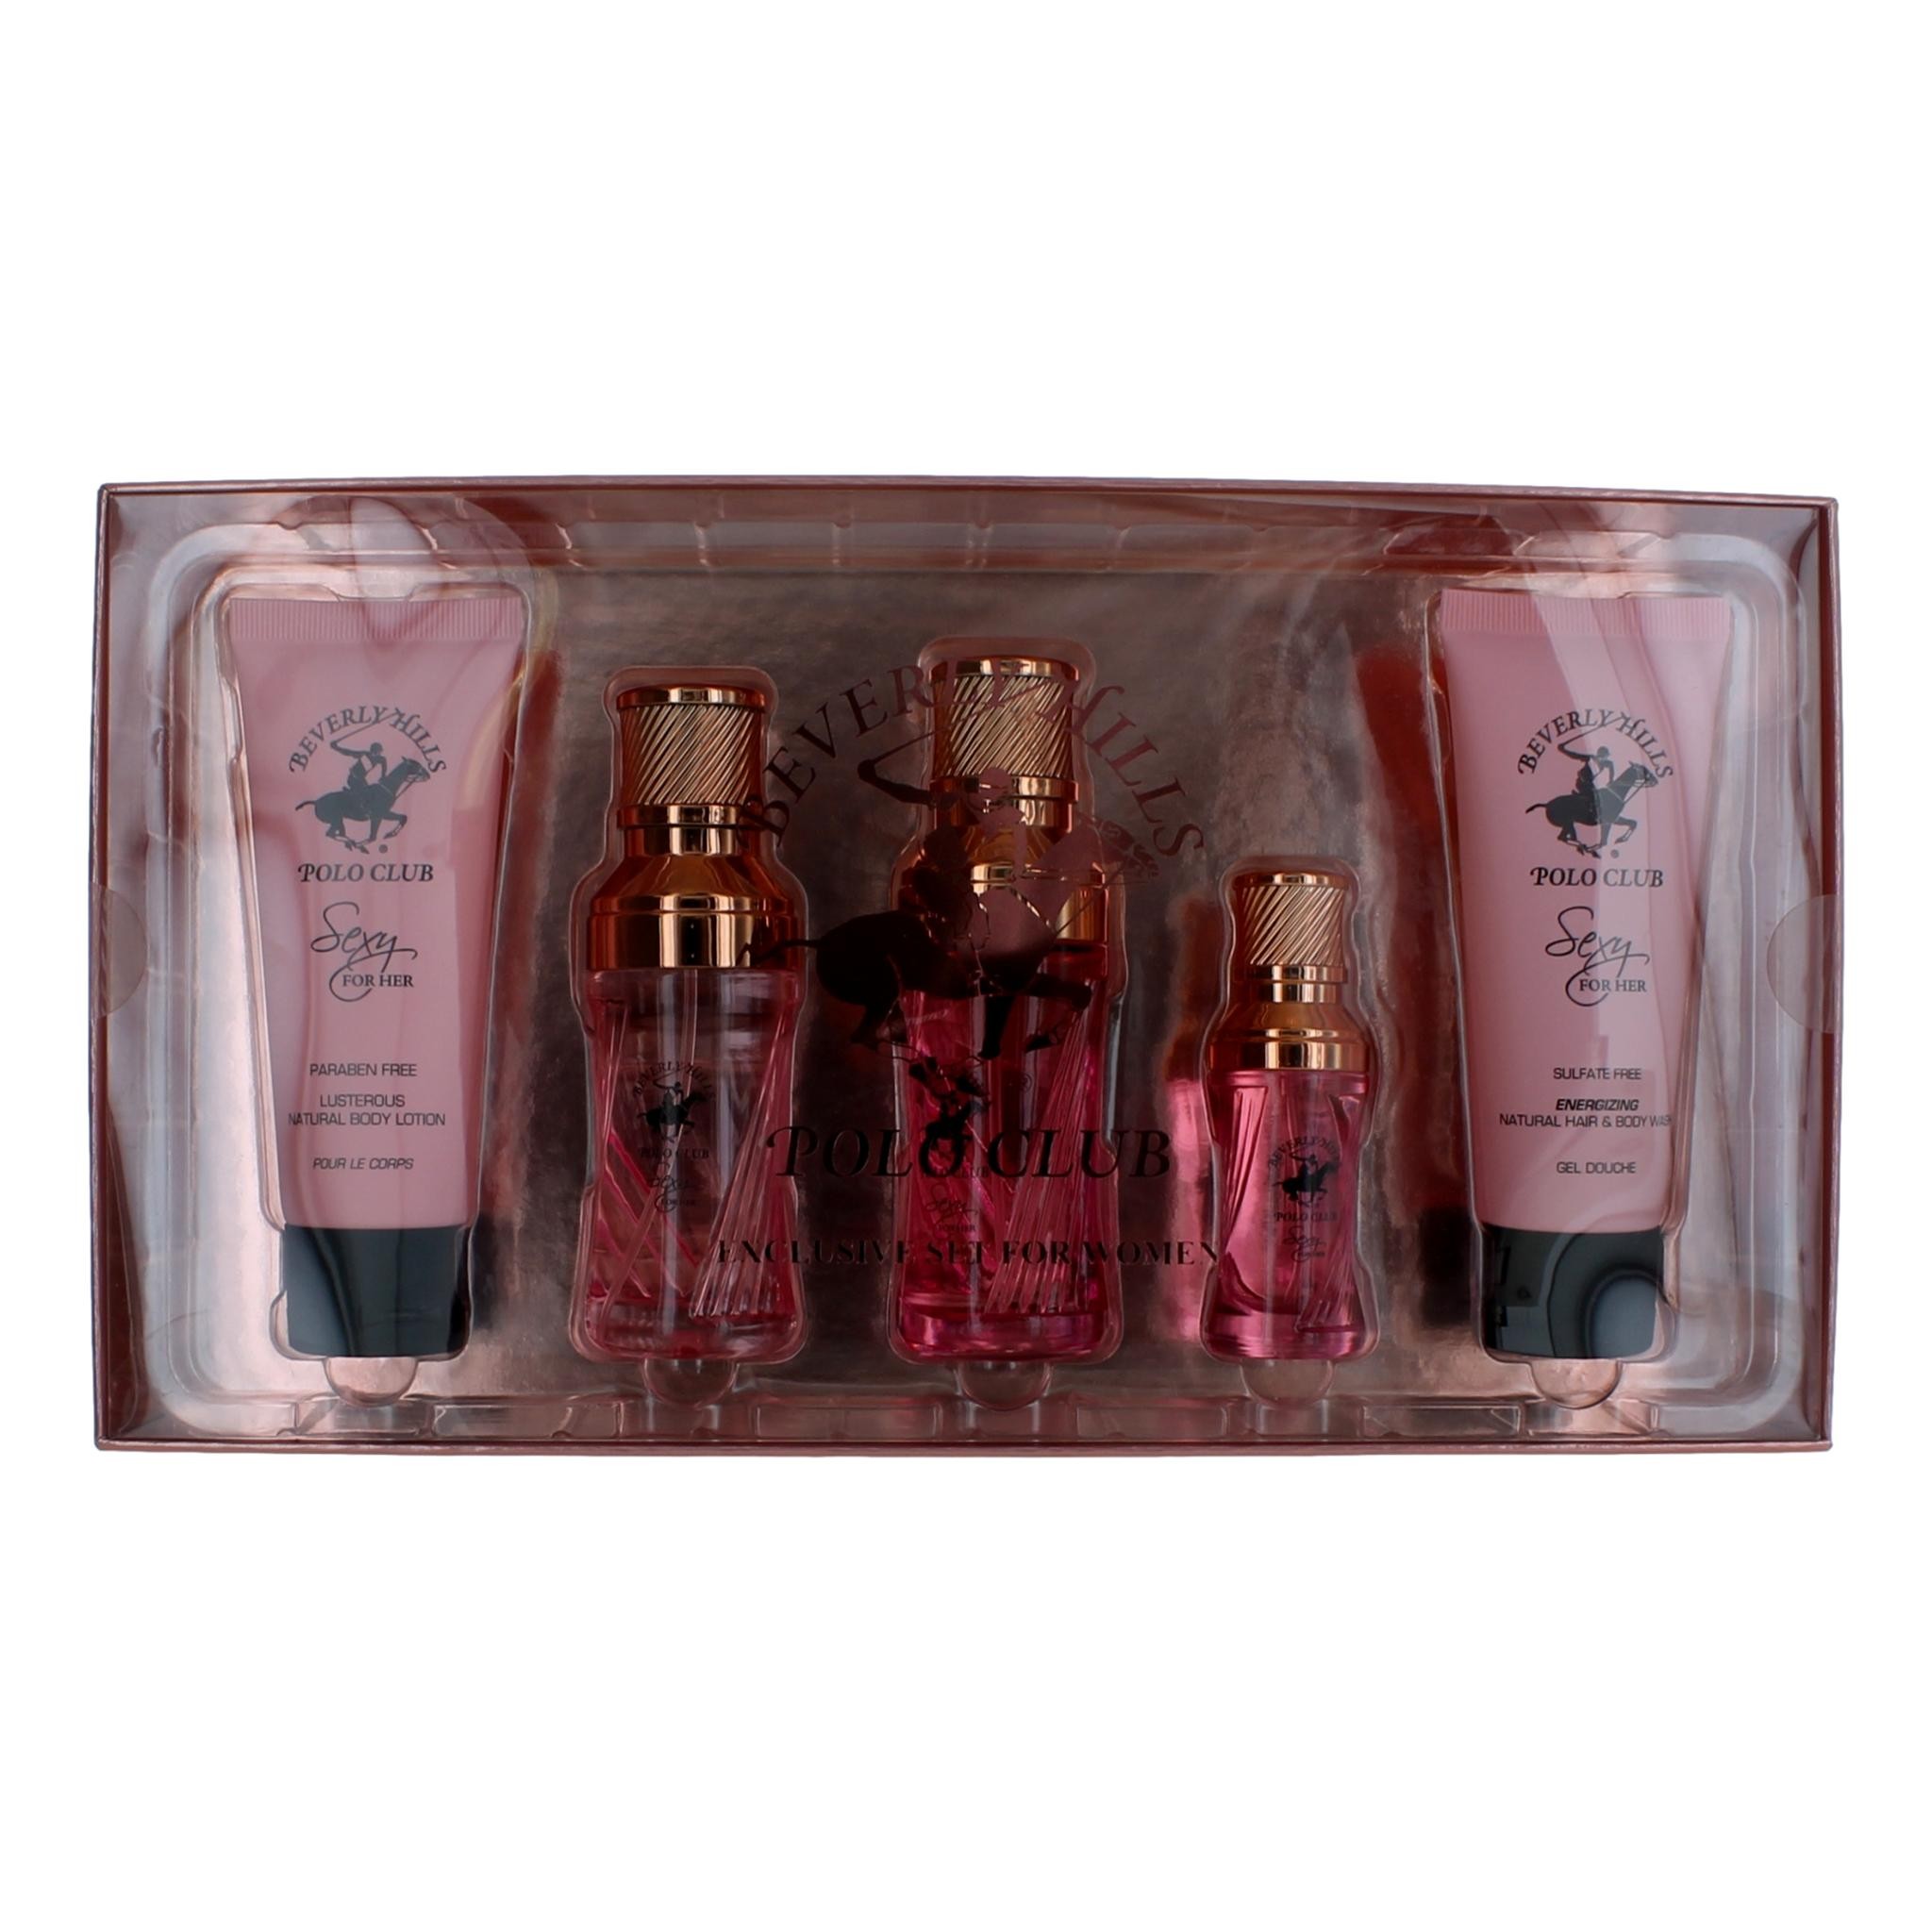 BHPC Sexy by Beverly Hills Polo Club 5 pc Gift Set for Women.